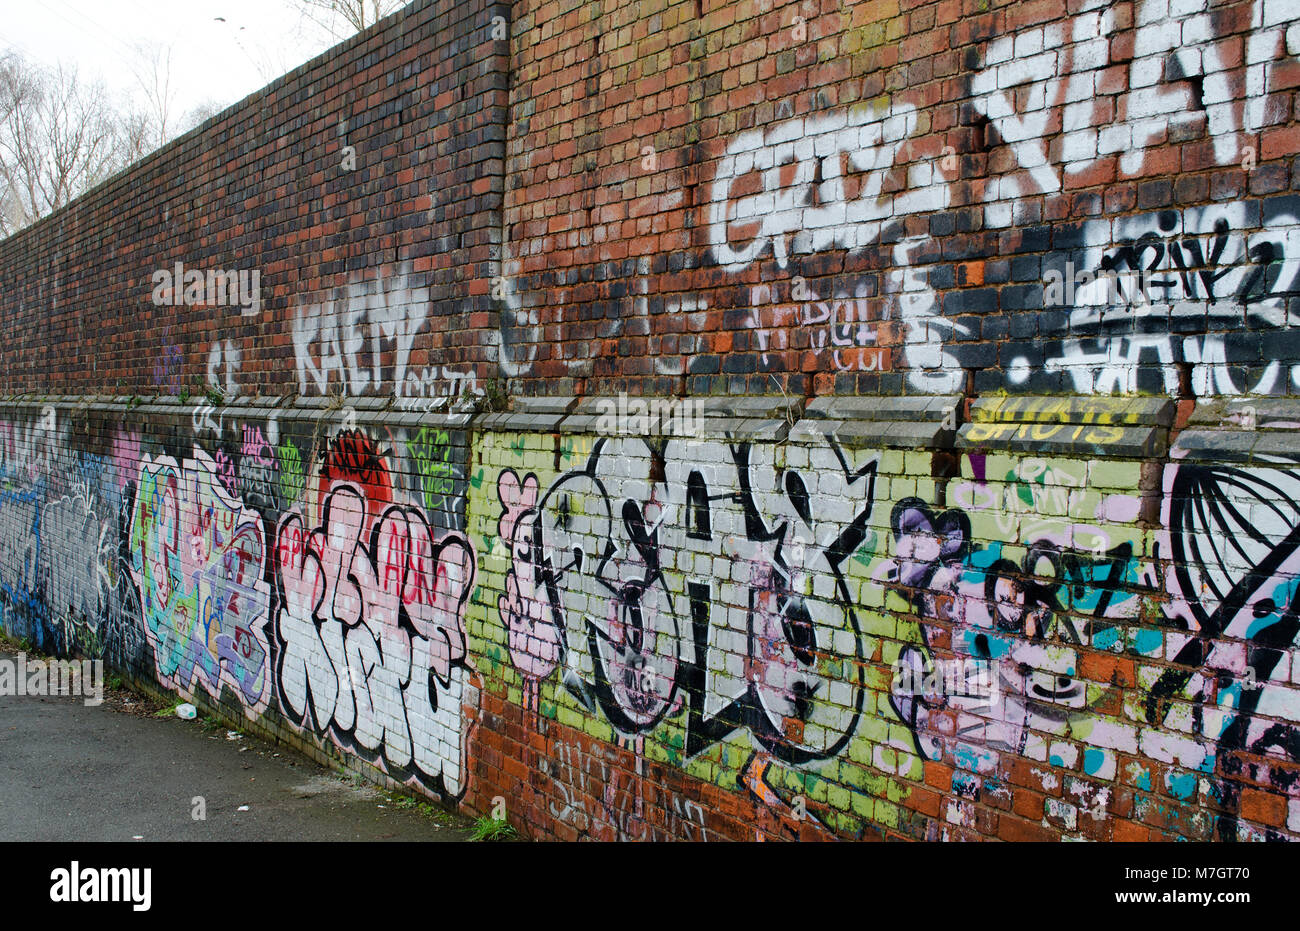 wall graffiti by the canal in Birmingham Stock Photo